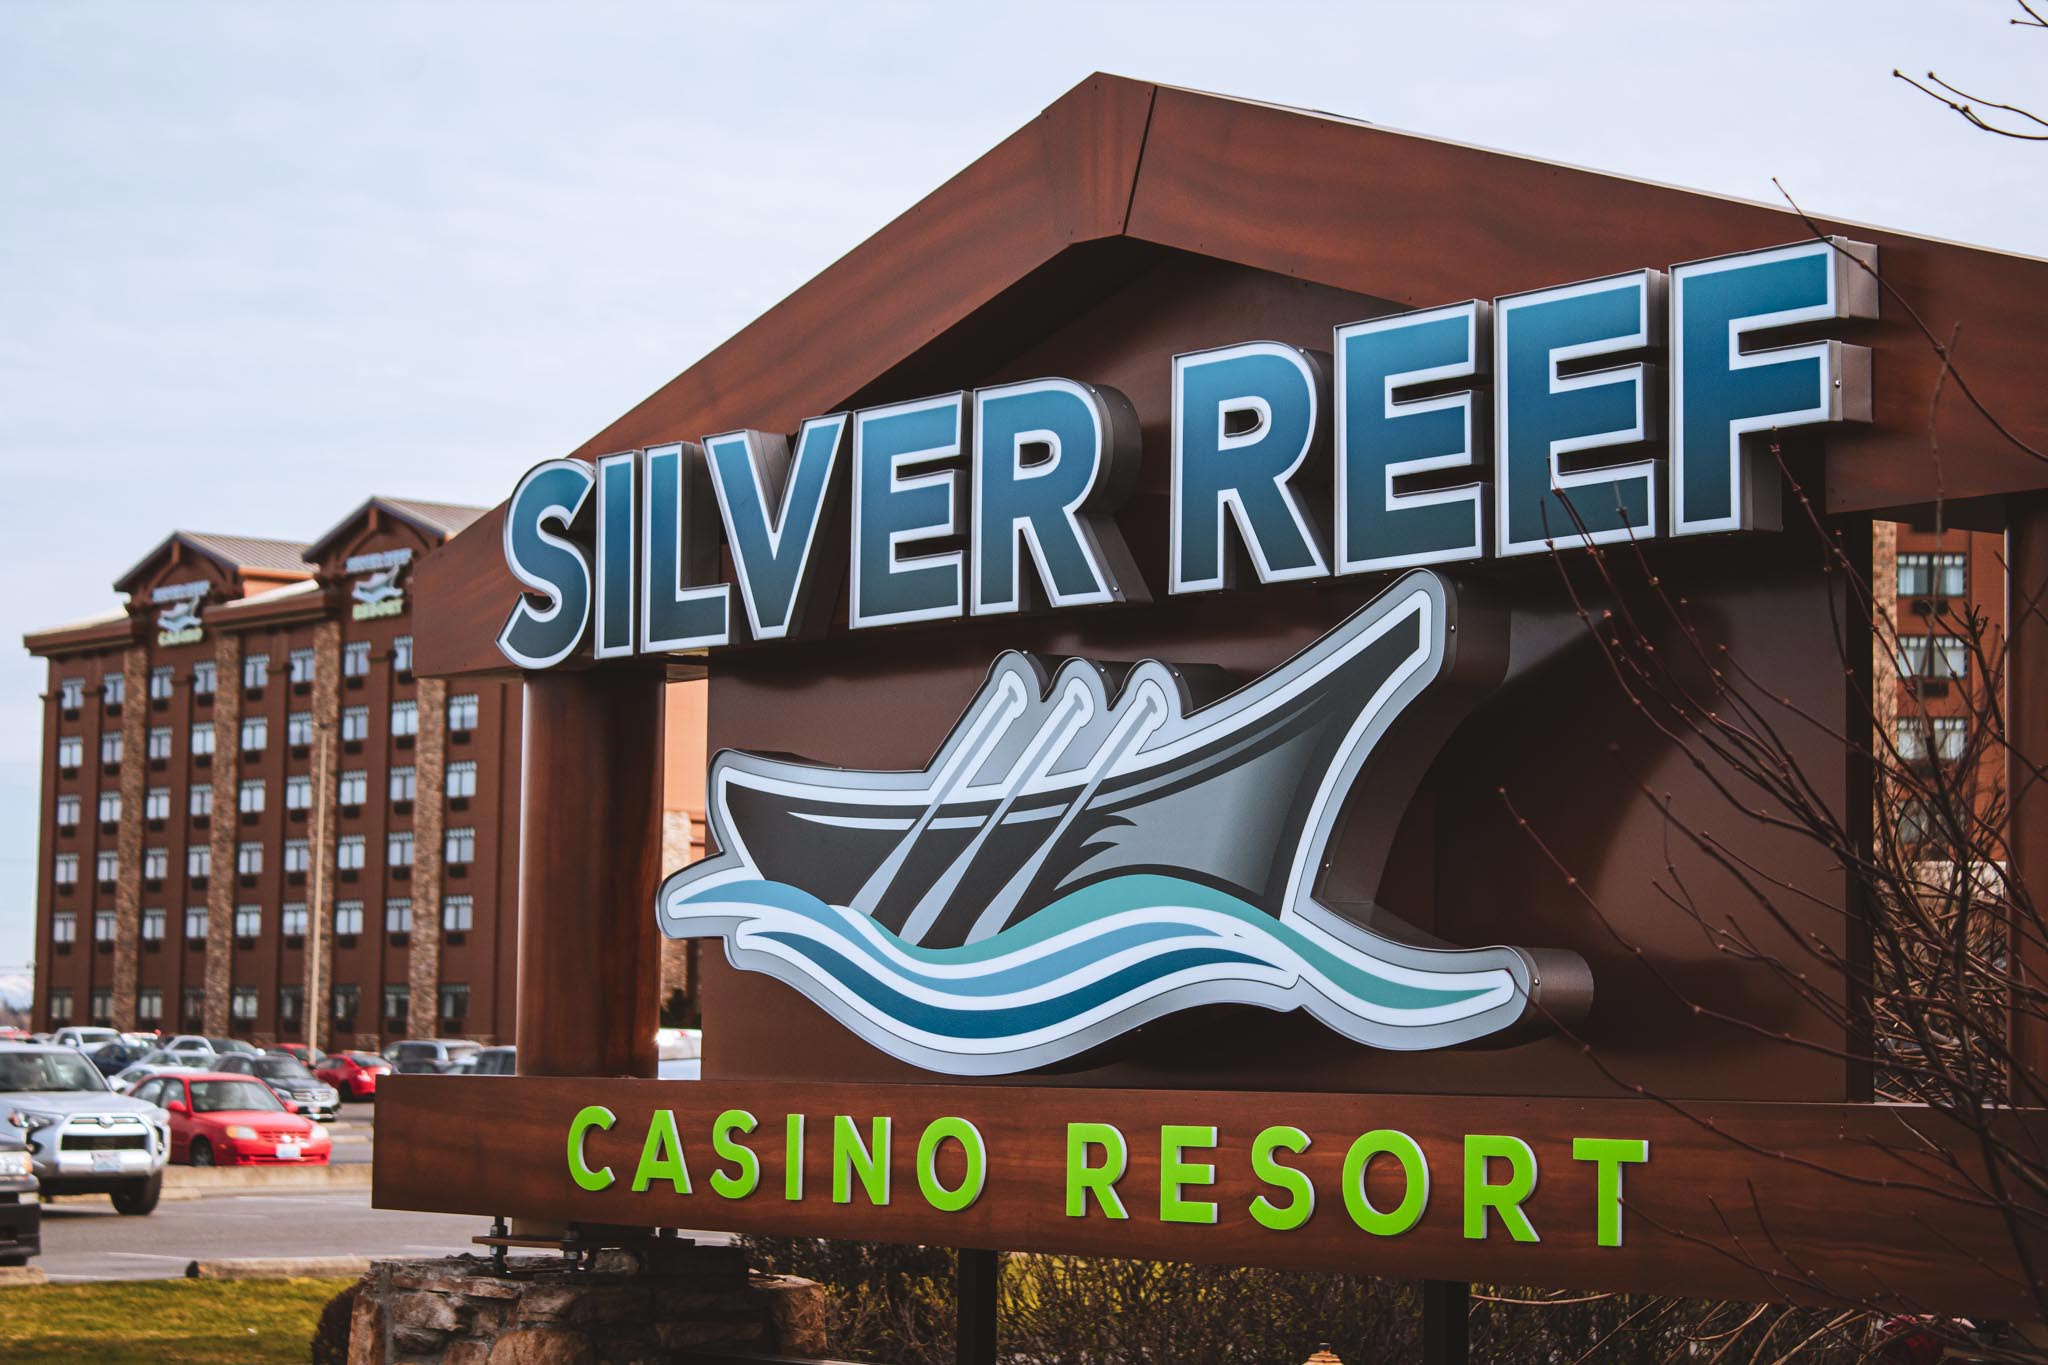 casino-silver-reef-channel-letters-monument-sign